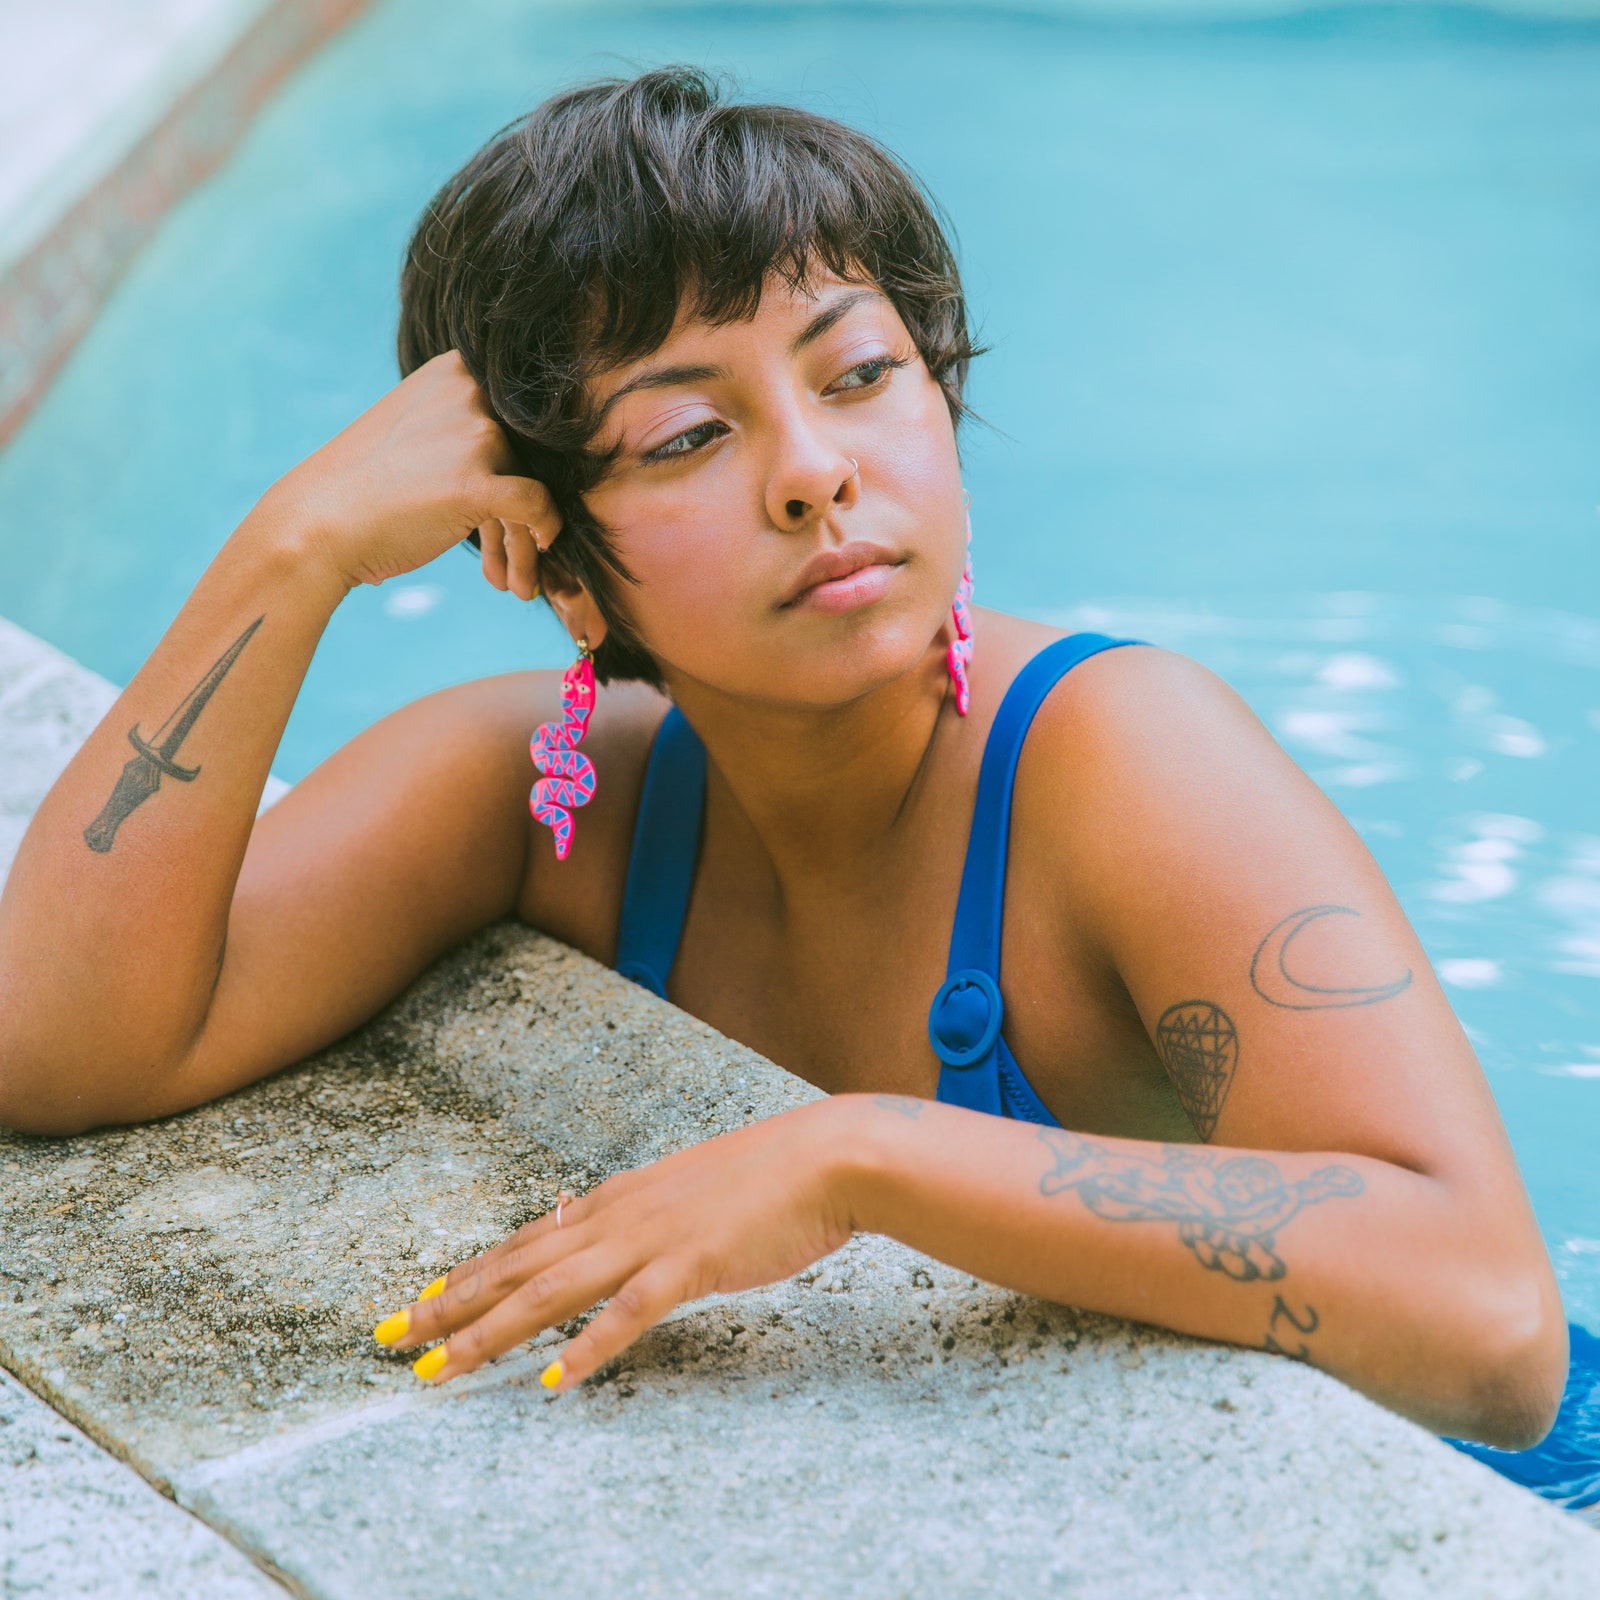 Why You Should Wait to Swim After Getting a Tattoo